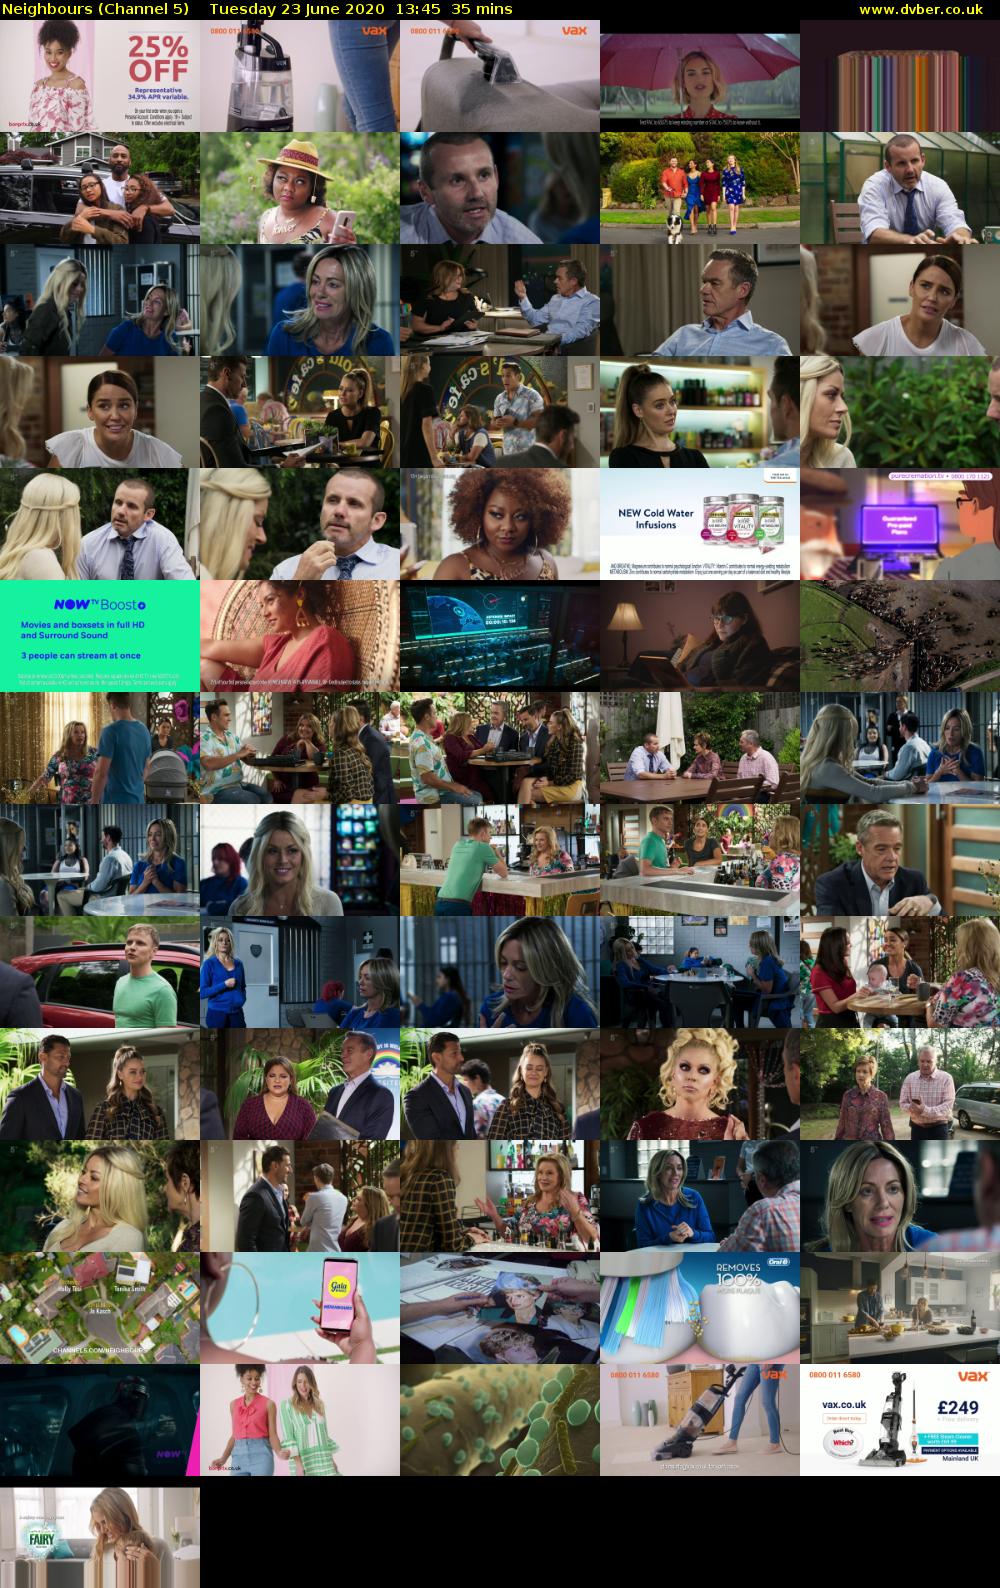 Neighbours (Channel 5) Tuesday 23 June 2020 13:45 - 14:20